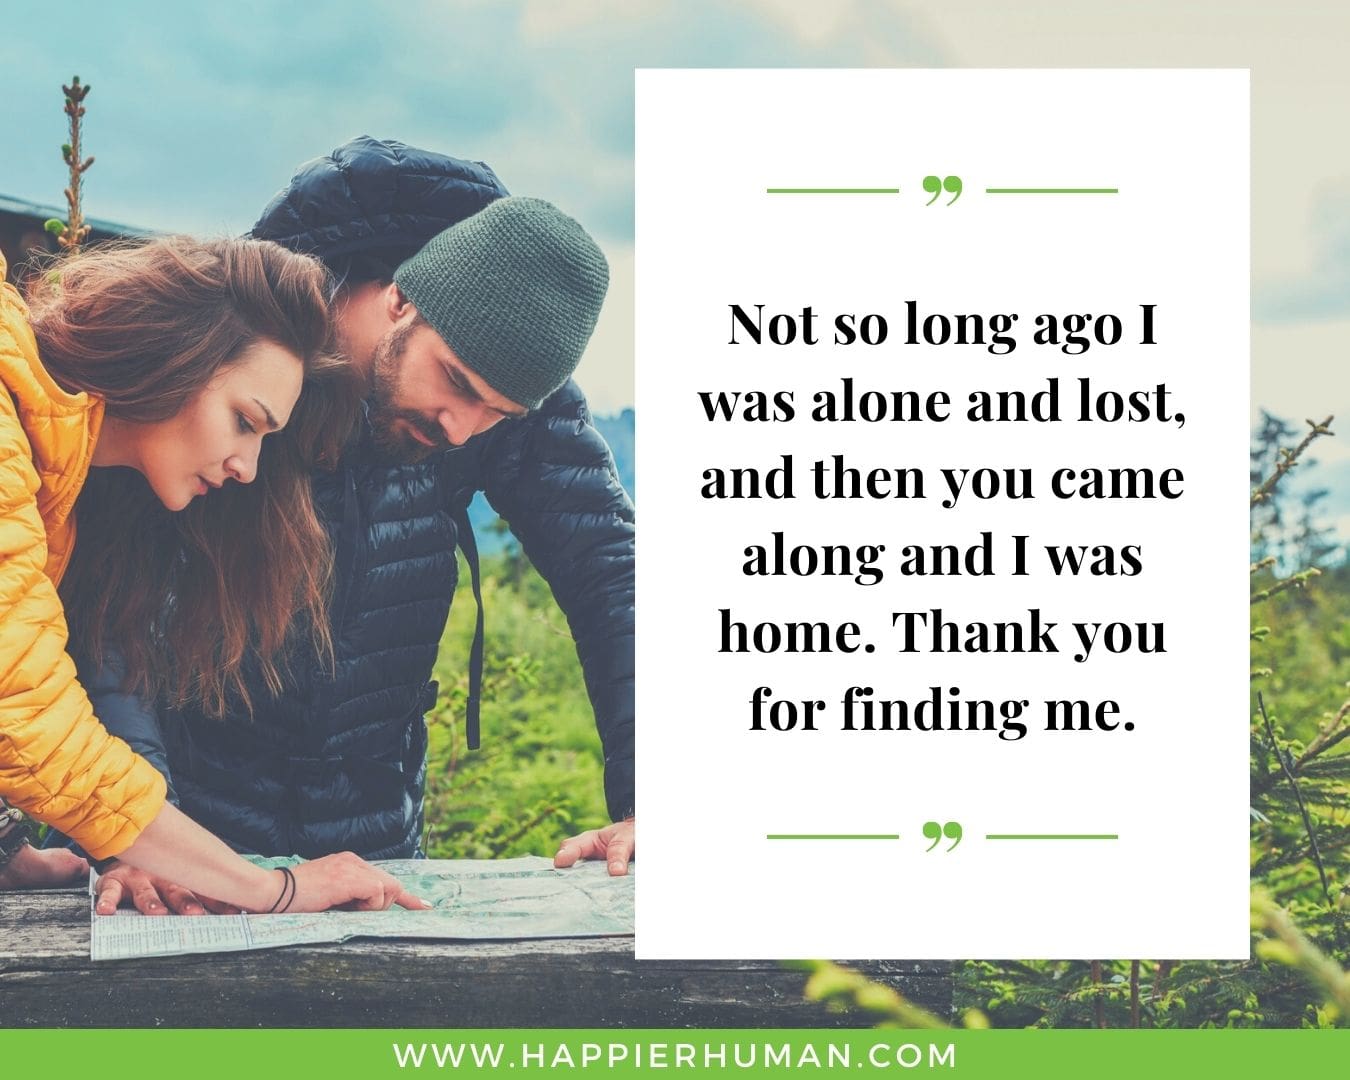 Sweet and Romantic Love Quotes for Her - “Not so long ago I was alone and lost, and then you came along and I was home. Thank you for finding me.”